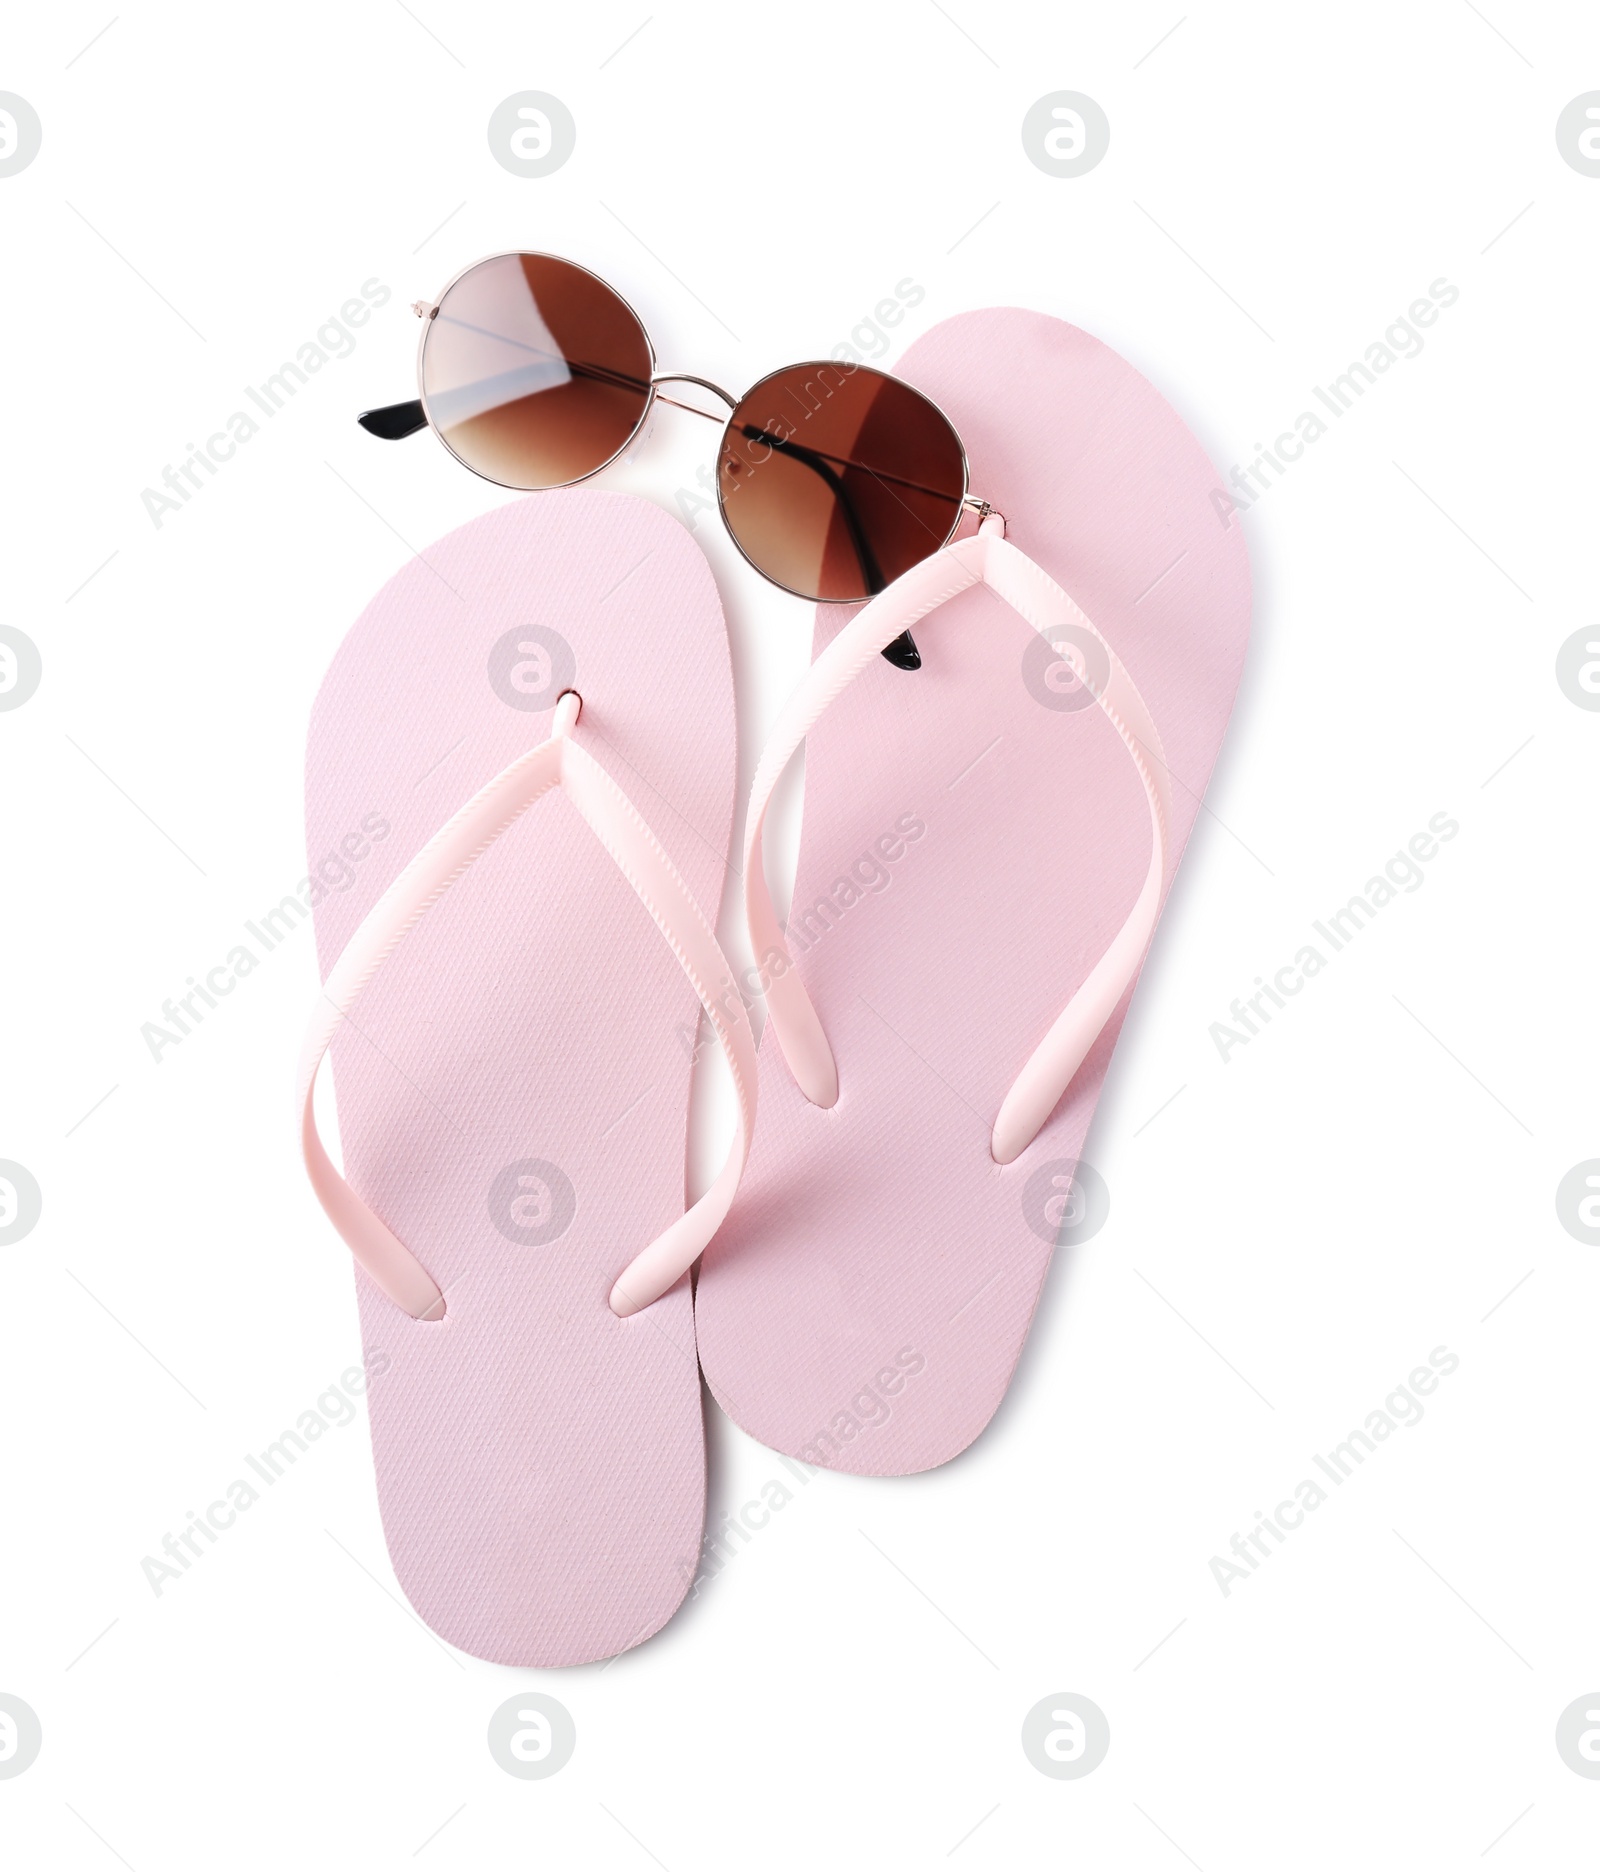 Photo of Flip flops and sunglasses on white background, top view. Beach objects